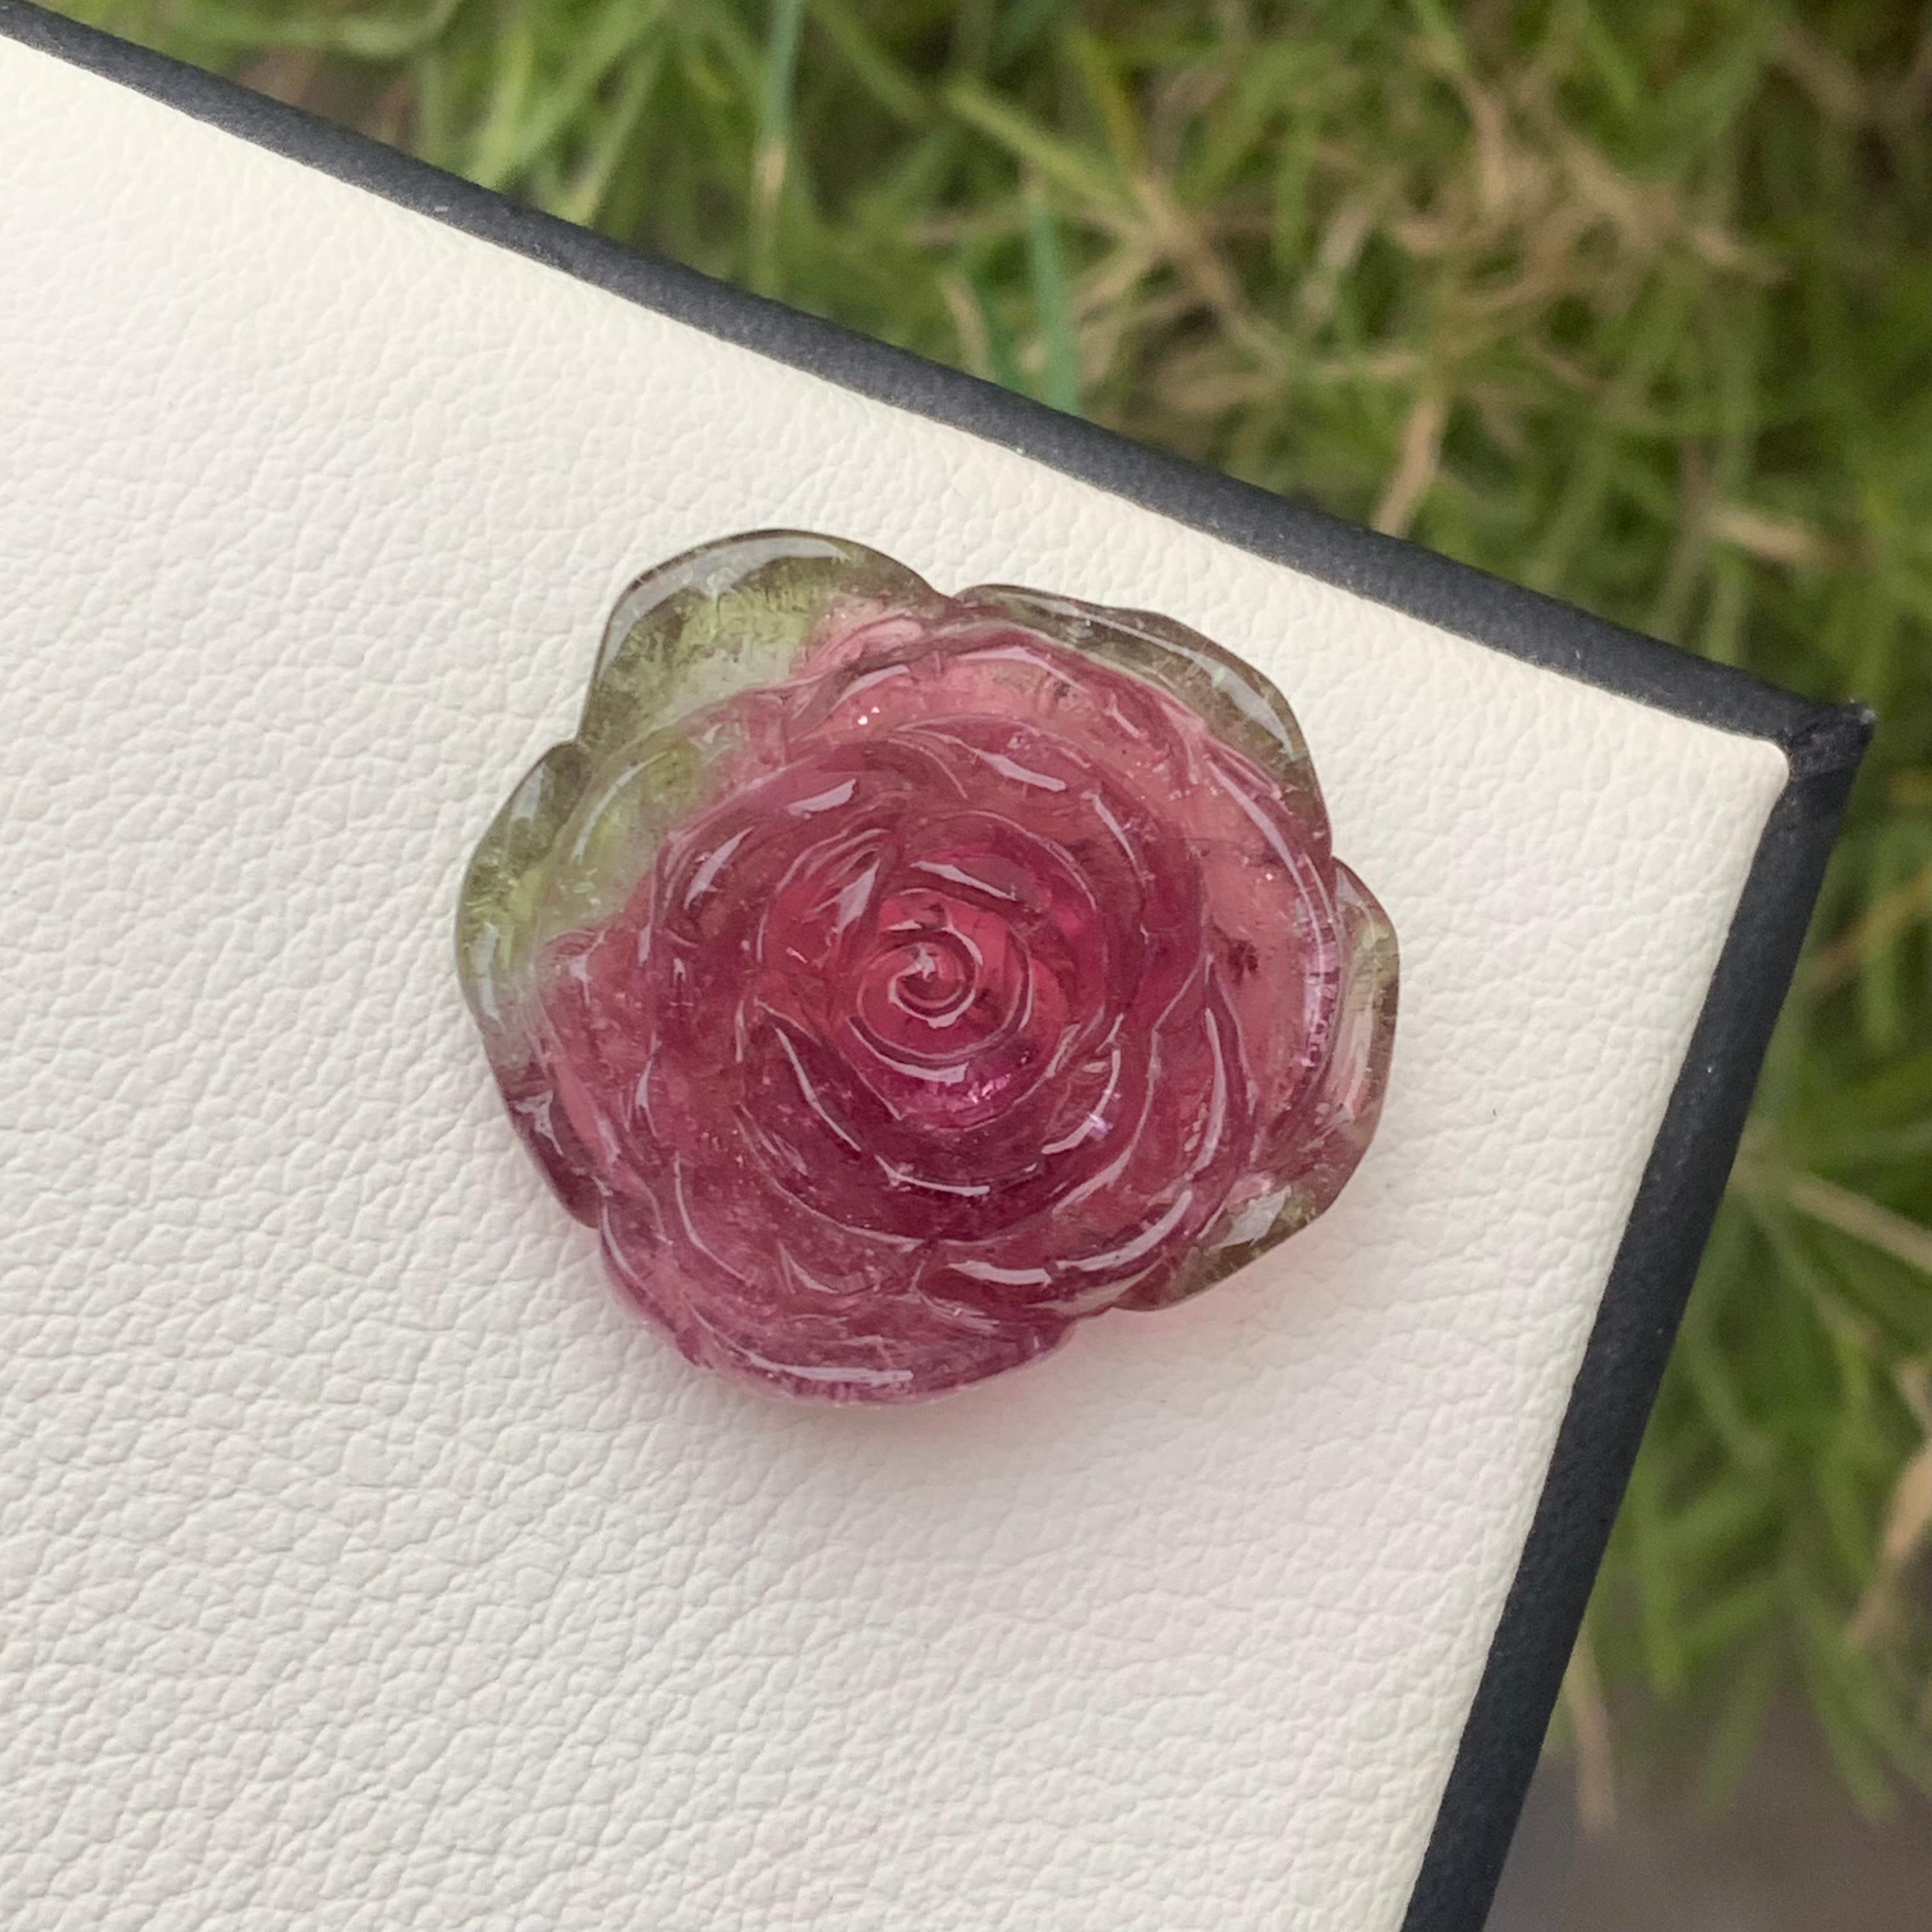 Bicolor Tourmaline Carved
Weight: 30.35 Carats
Dimension: 25x23x6.9 Mm
Origin: Afghanistan
Color: Green & Pink
Shape: Flower Carved
Quality: AAA
.
Bicolor tourmaline is connected to the heart chakra, which makes it good for cleansing and removing